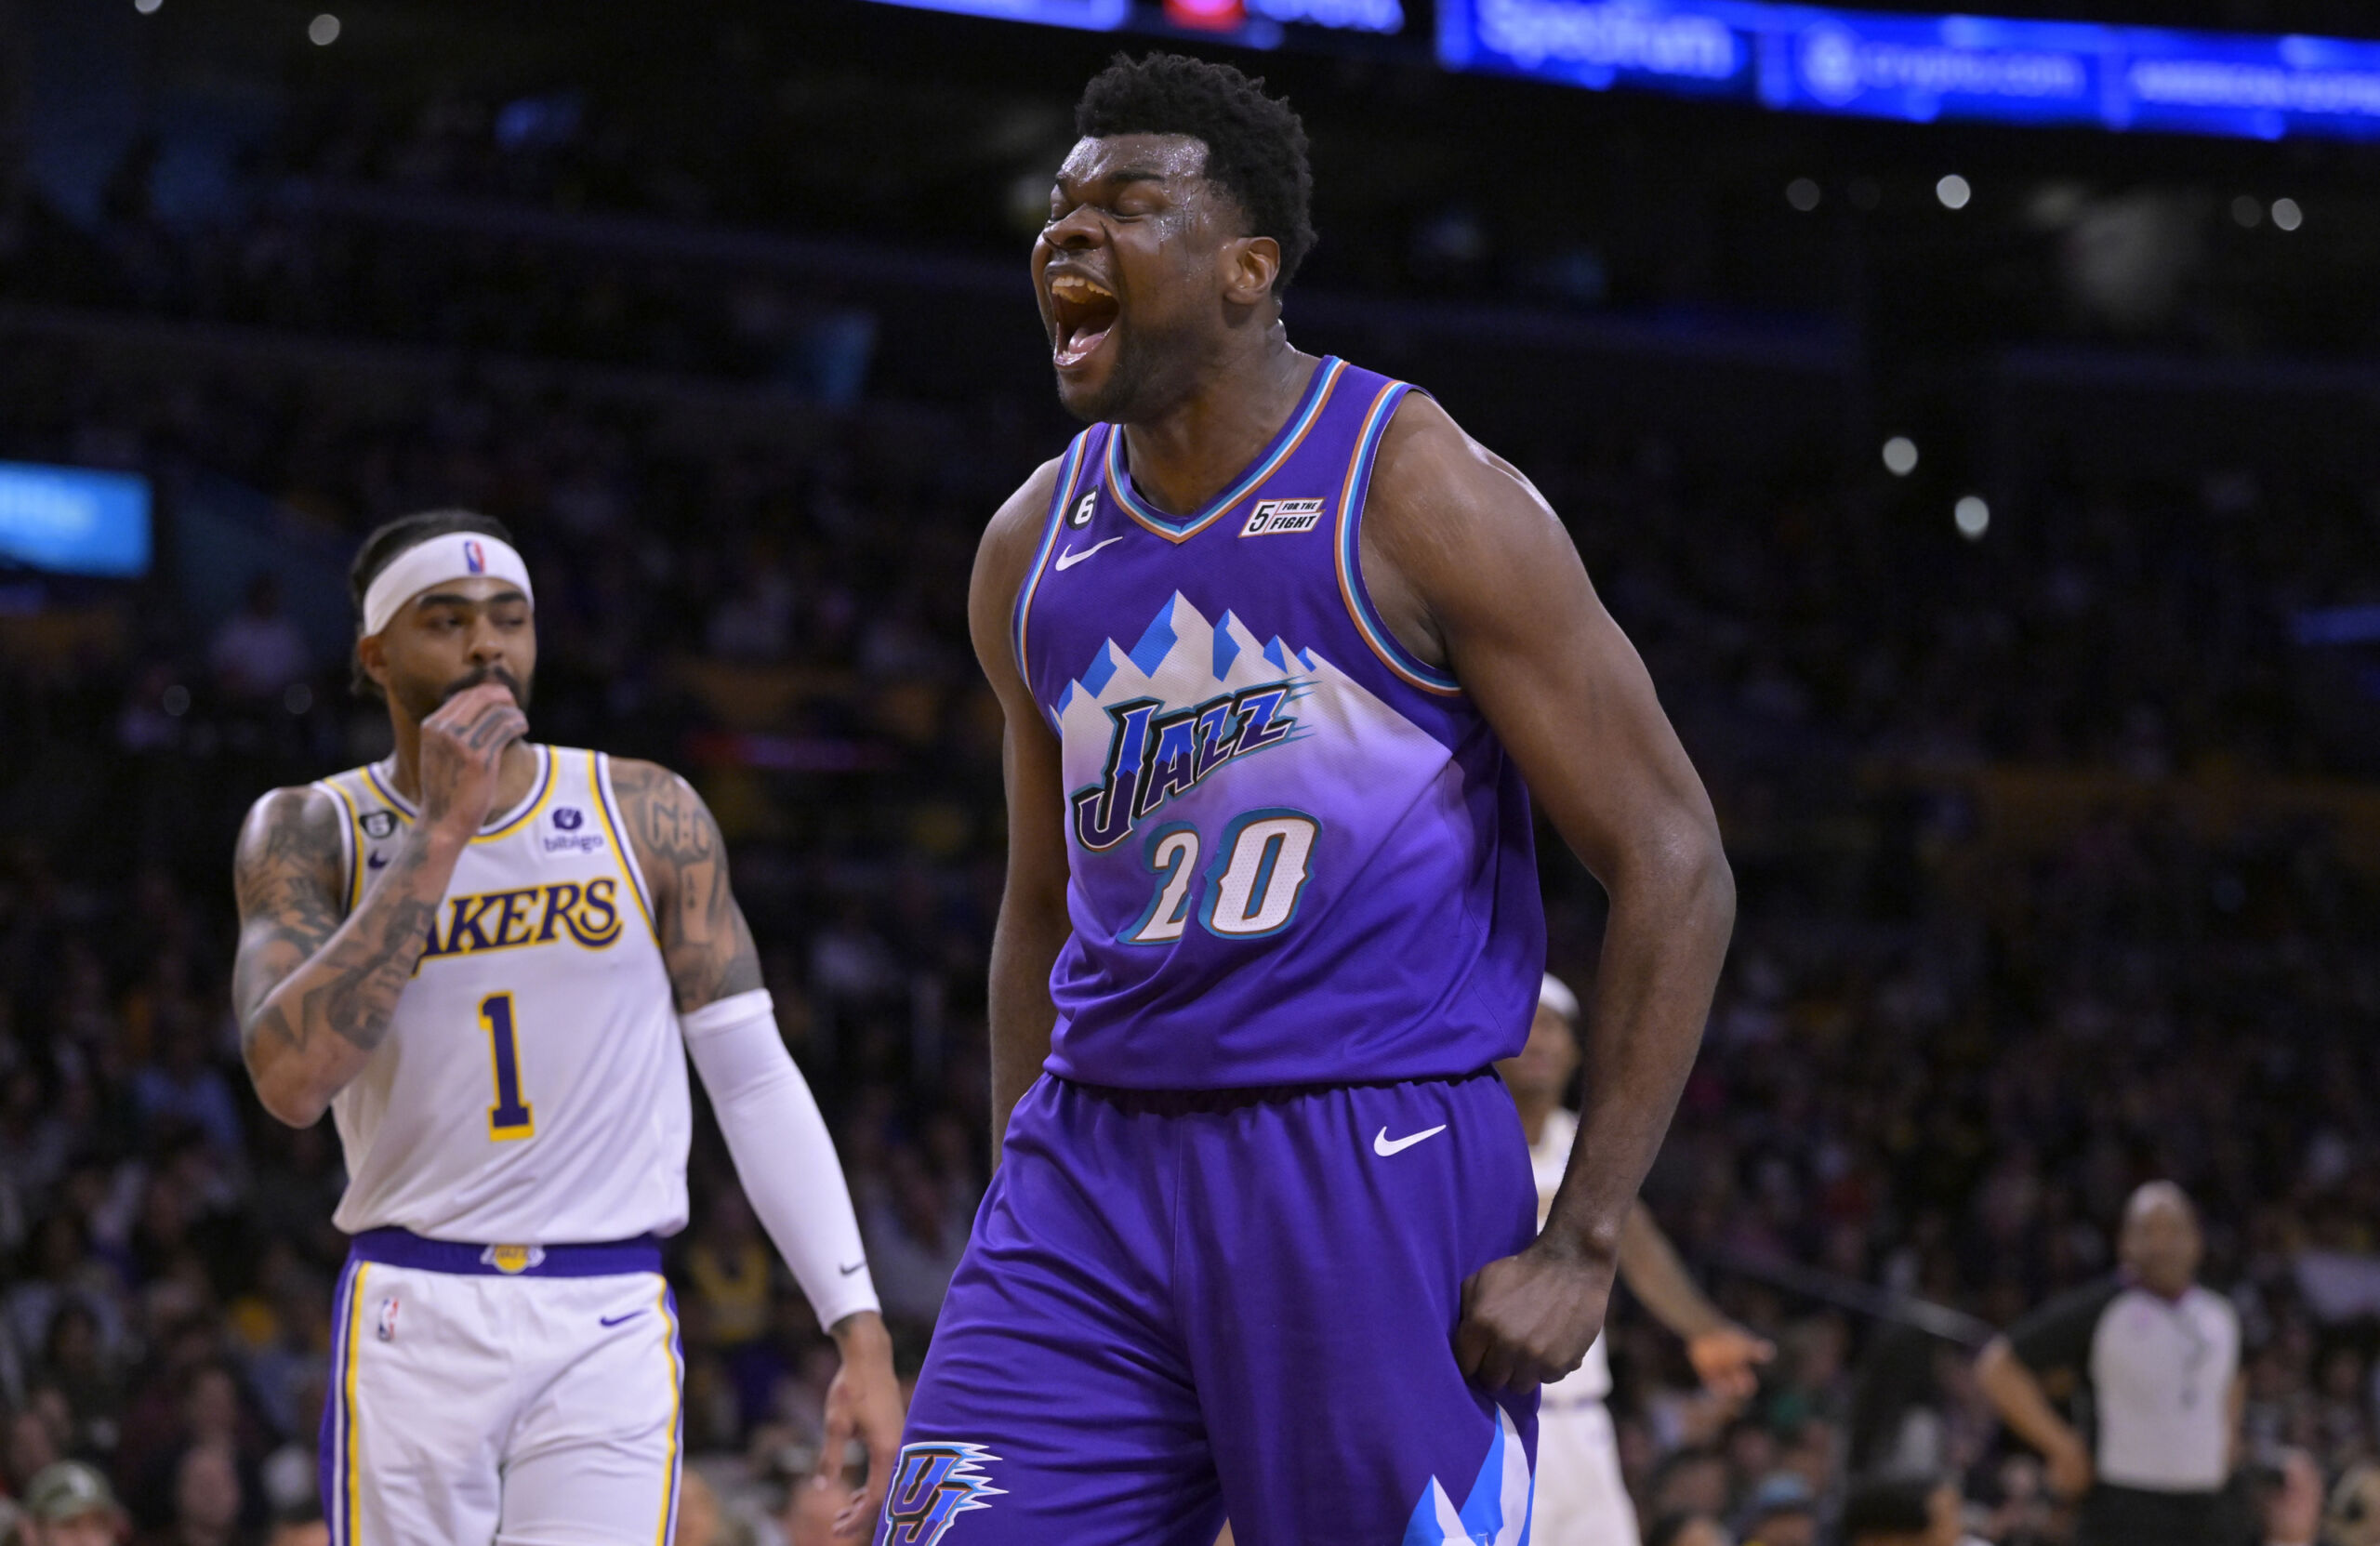 Apr 9, 2023; Los Angeles, California, USA; Utah Jazz center Udoka Azubuike (20) reacts after a dunk over Los Angeles Lakers forward Anthony Davis (3) in the first half at Crypto.com Arena. Mandatory Credit: Jayne Kamin-Oncea-USA TODAY Sports